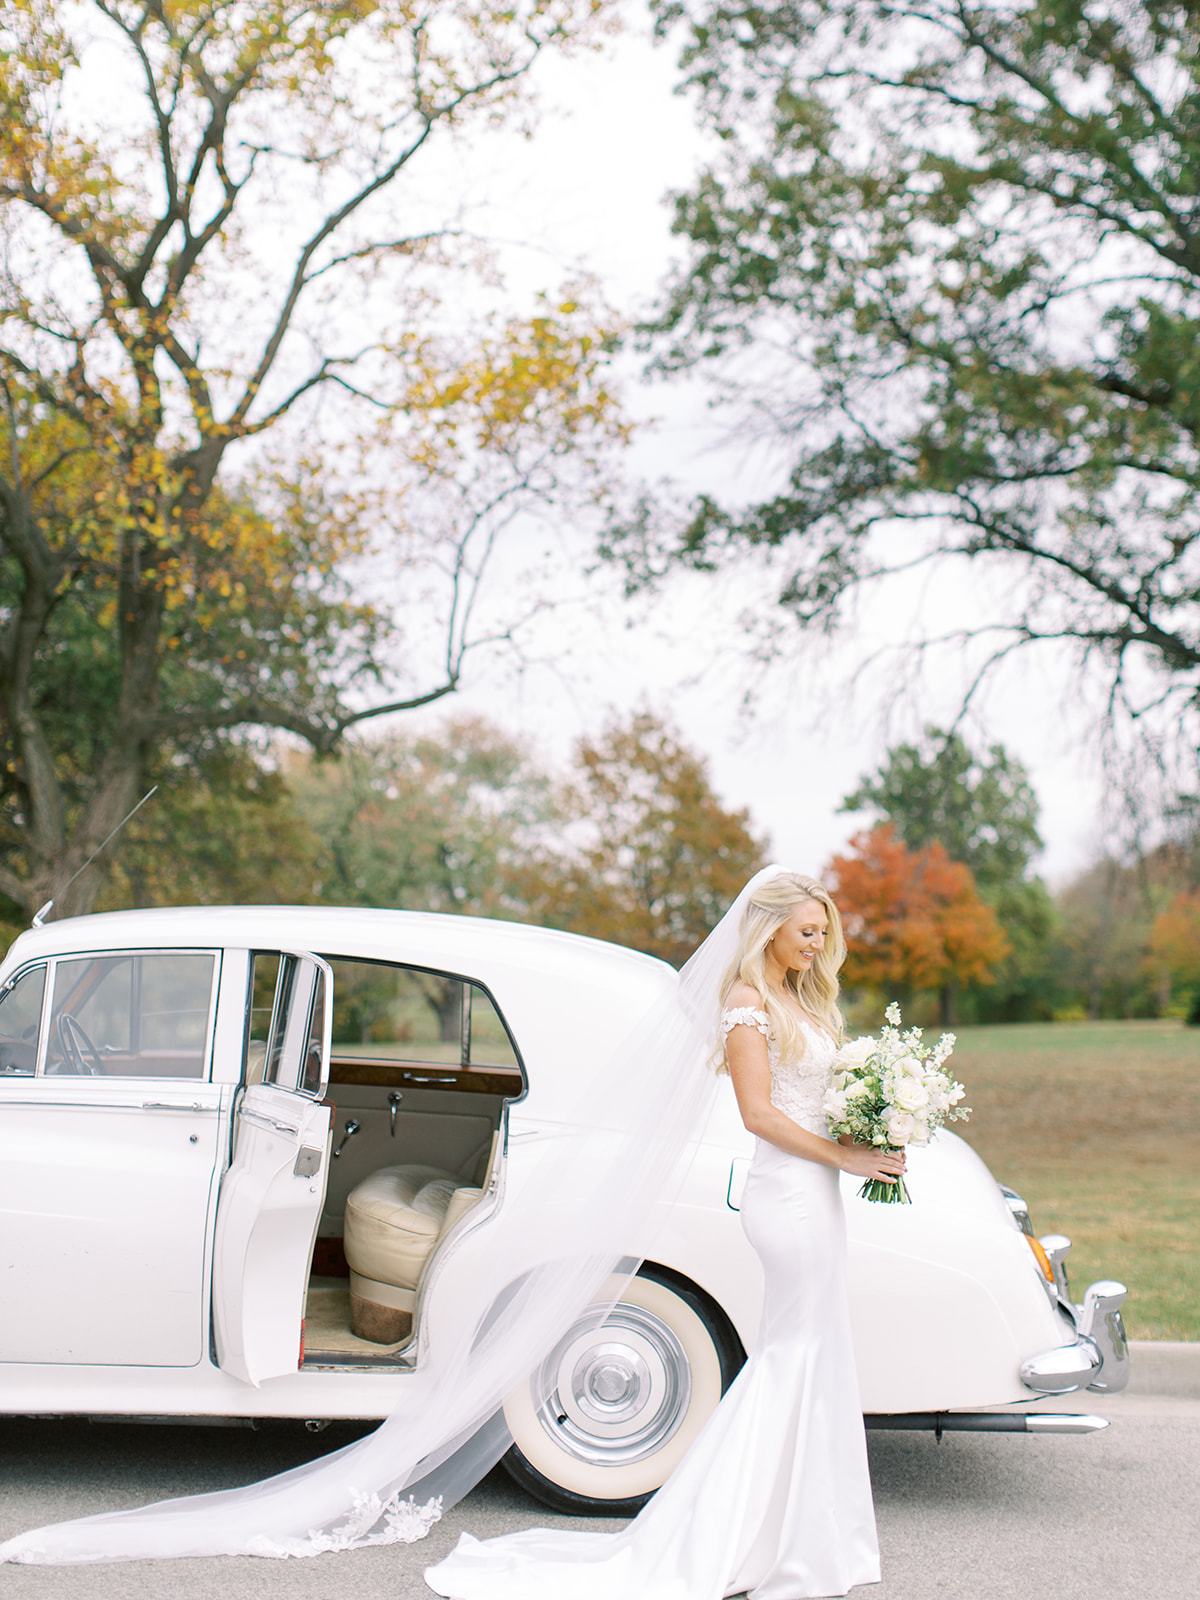 Bride smiling at bouquet in front of classic car